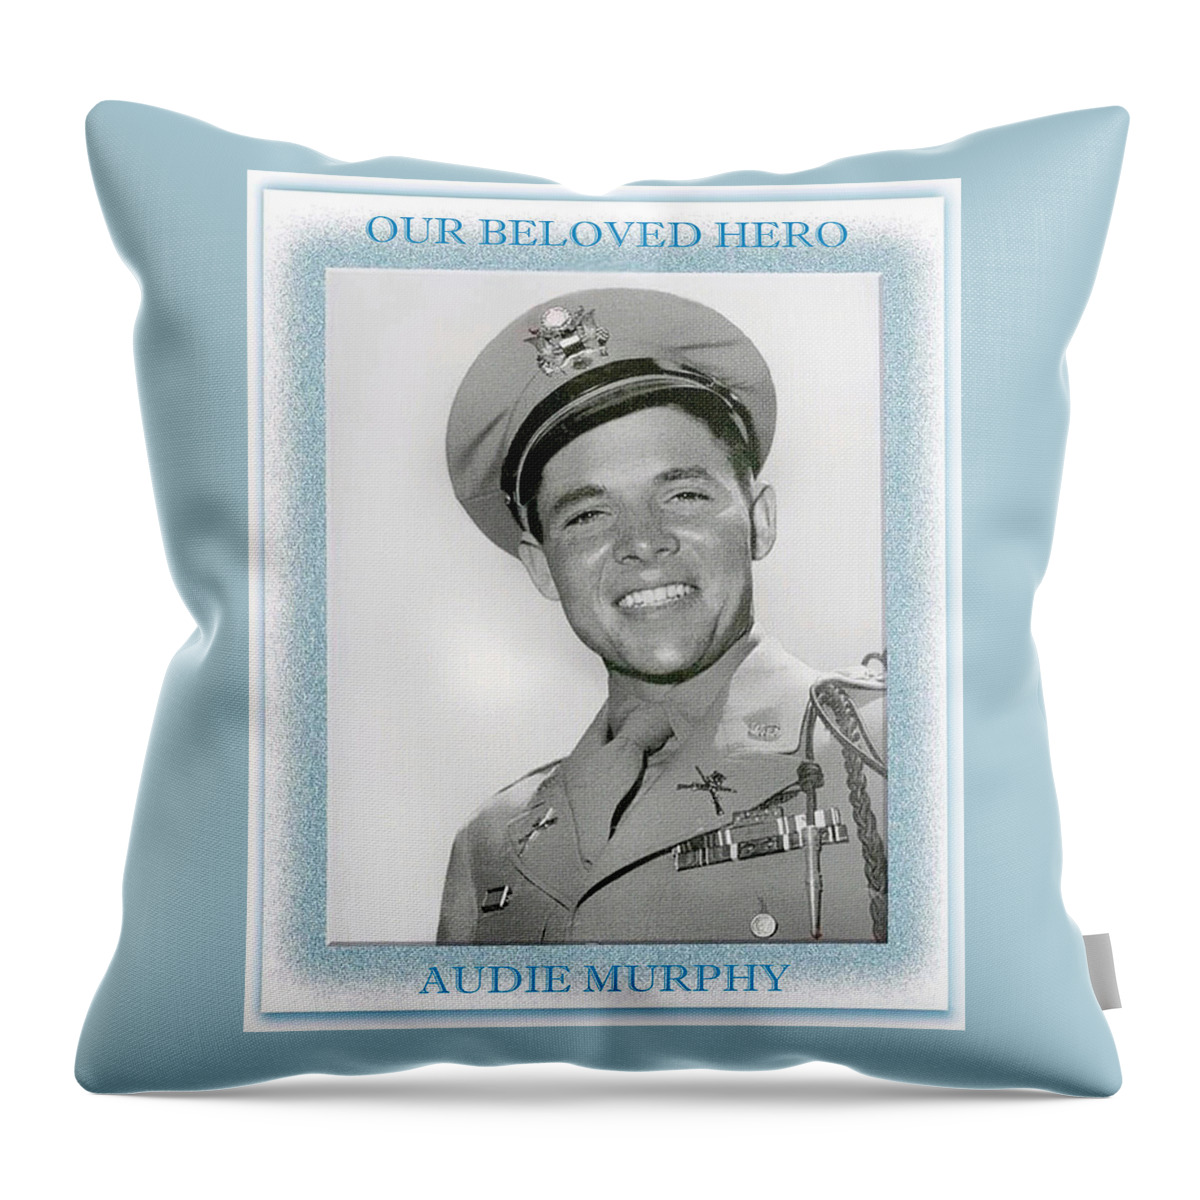 Audie Murphy Throw Pillow featuring the digital art Our Beloved Hero - Audie Murphy by Dyle Warren